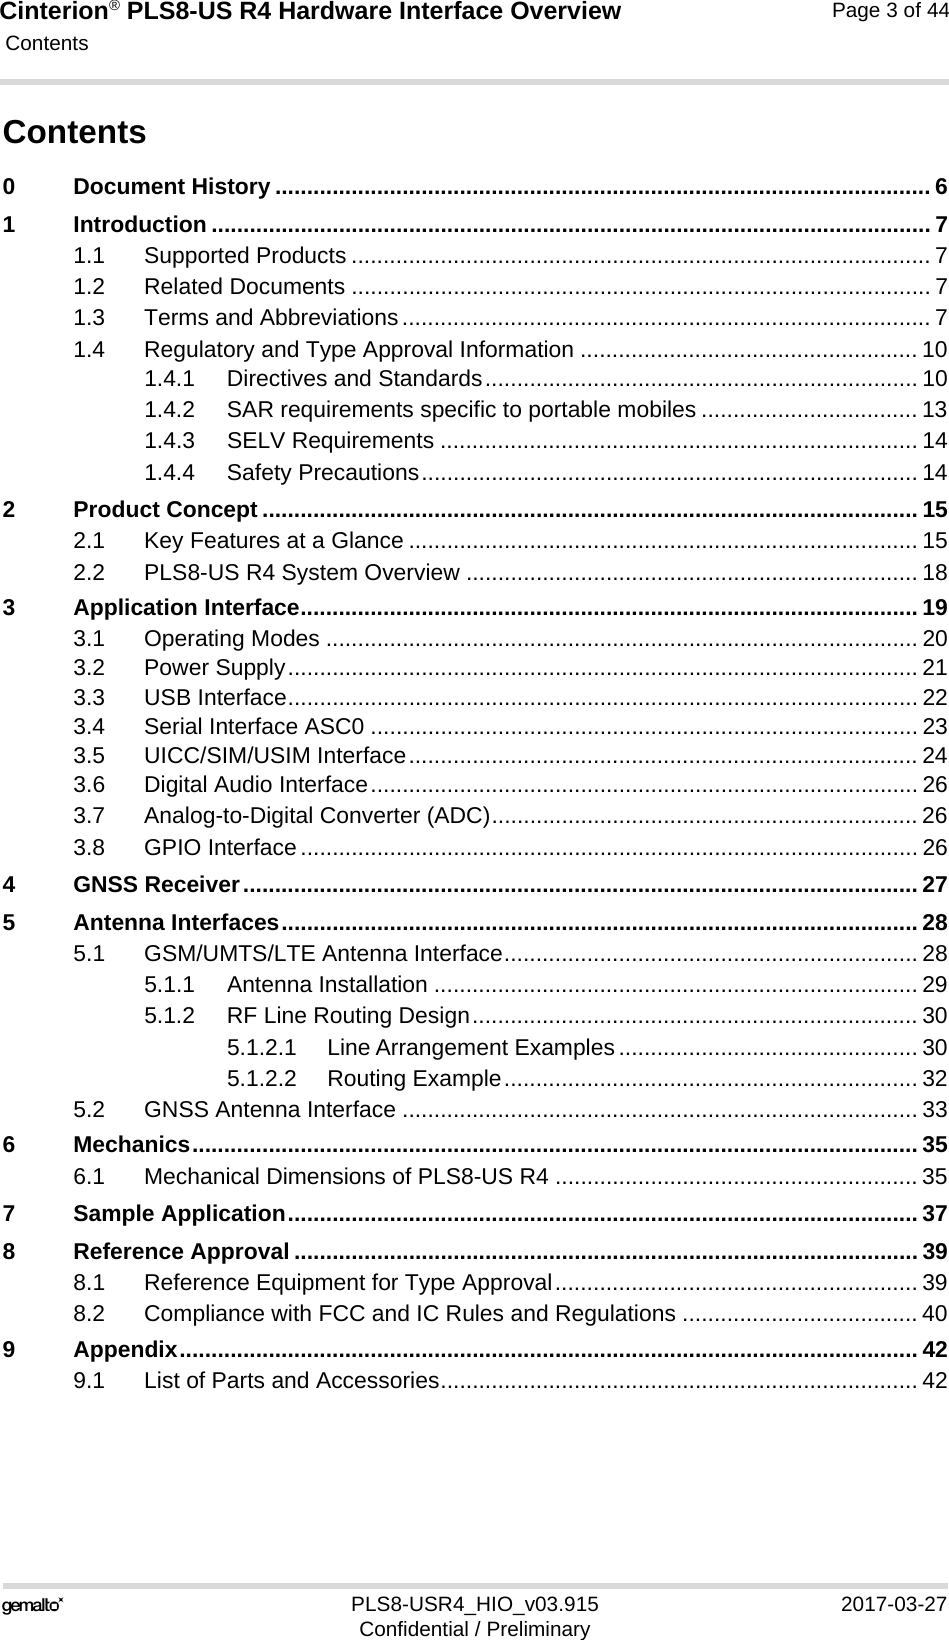 Cinterion® PLS8-US R4 Hardware Interface Overview Contents44PLS8-USR4_HIO_v03.915 2017-03-27Confidential / PreliminaryPage 3 of 44Contents0 Document History ....................................................................................................... 61 Introduction ................................................................................................................. 71.1 Supported Products ........................................................................................... 71.2 Related Documents ........................................................................................... 71.3 Terms and Abbreviations................................................................................... 71.4 Regulatory and Type Approval Information ..................................................... 101.4.1 Directives and Standards.................................................................... 101.4.2 SAR requirements specific to portable mobiles .................................. 131.4.3 SELV Requirements ........................................................................... 141.4.4 Safety Precautions.............................................................................. 142 Product Concept ....................................................................................................... 152.1 Key Features at a Glance ................................................................................ 152.2 PLS8-US R4 System Overview ....................................................................... 183 Application Interface................................................................................................. 193.1 Operating Modes ............................................................................................. 203.2 Power Supply................................................................................................... 213.3 USB Interface................................................................................................... 223.4 Serial Interface ASC0 ...................................................................................... 233.5 UICC/SIM/USIM Interface................................................................................ 243.6 Digital Audio Interface...................................................................................... 263.7 Analog-to-Digital Converter (ADC)................................................................... 263.8 GPIO Interface................................................................................................. 264 GNSS Receiver.......................................................................................................... 275 Antenna Interfaces.................................................................................................... 285.1 GSM/UMTS/LTE Antenna Interface................................................................. 285.1.1 Antenna Installation ............................................................................ 295.1.2 RF Line Routing Design...................................................................... 305.1.2.1 Line Arrangement Examples ............................................... 305.1.2.2 Routing Example................................................................. 325.2 GNSS Antenna Interface ................................................................................. 336 Mechanics.................................................................................................................. 356.1 Mechanical Dimensions of PLS8-US R4 ......................................................... 357 Sample Application................................................................................................... 378 Reference Approval .................................................................................................. 398.1 Reference Equipment for Type Approval......................................................... 398.2 Compliance with FCC and IC Rules and Regulations ..................................... 409 Appendix.................................................................................................................... 429.1 List of Parts and Accessories........................................................................... 42